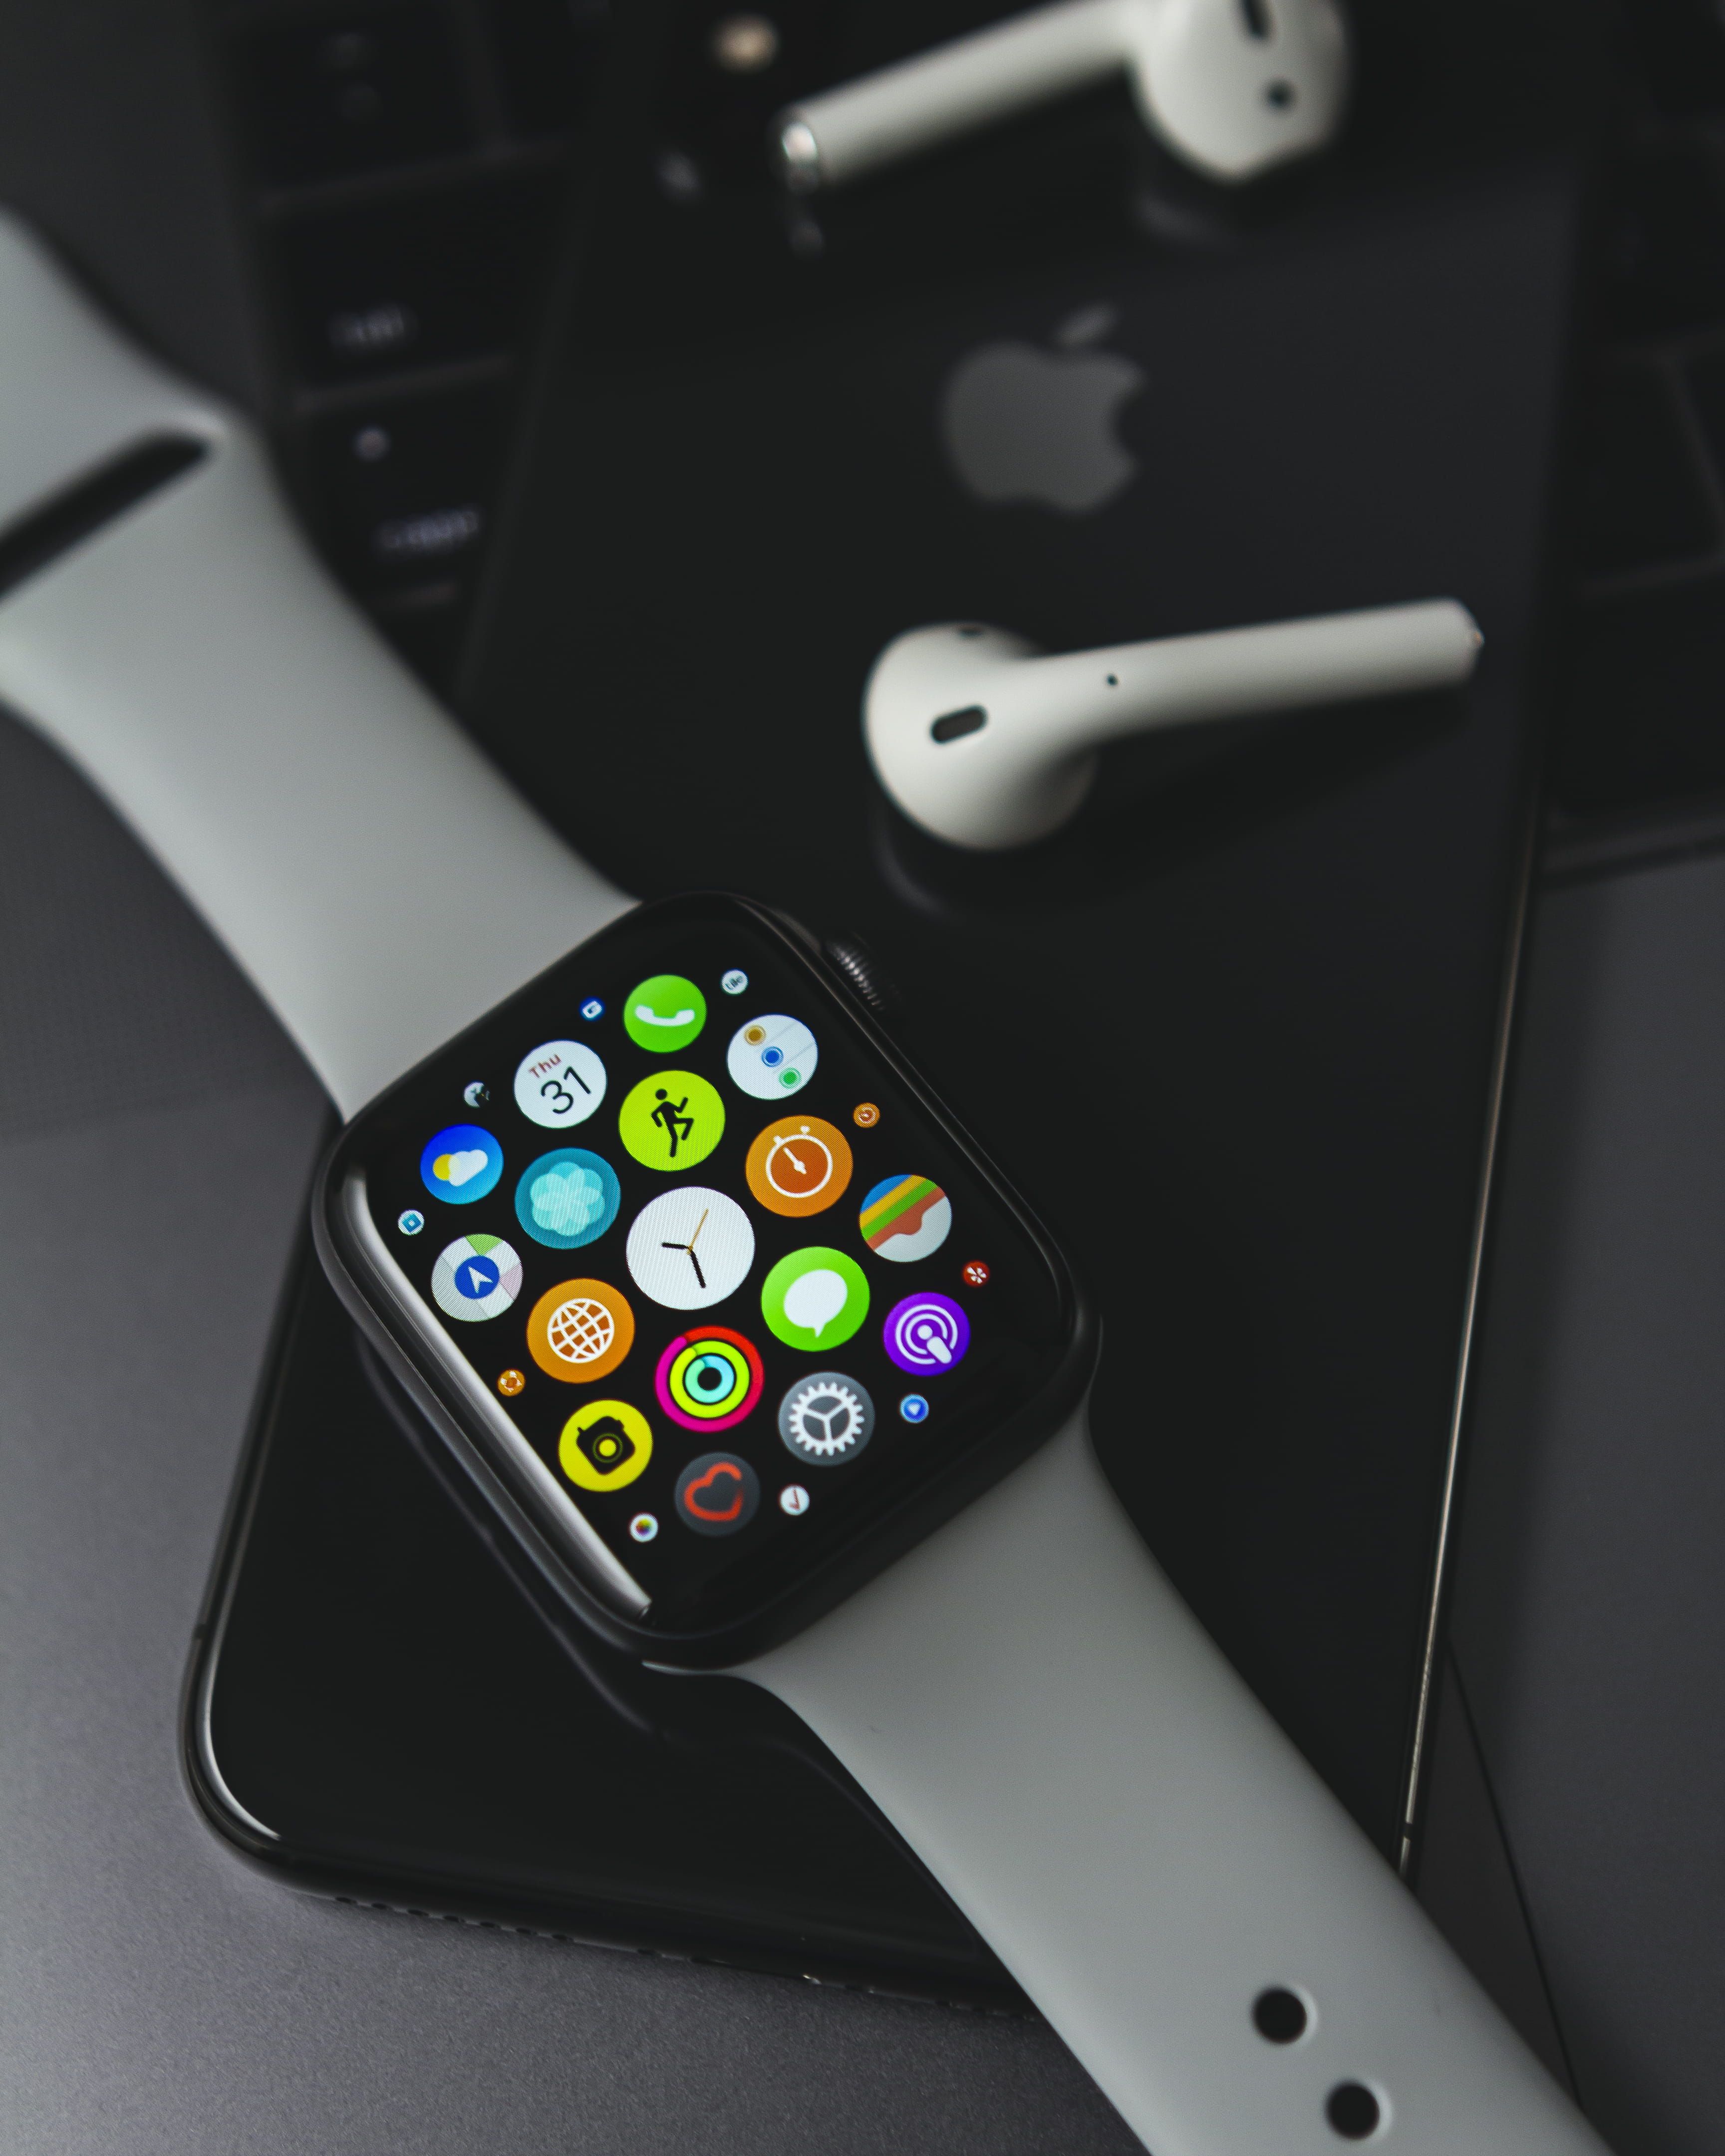 HD Wallpaper Apple Watch On Jet Black iPhone Close Up Indoors